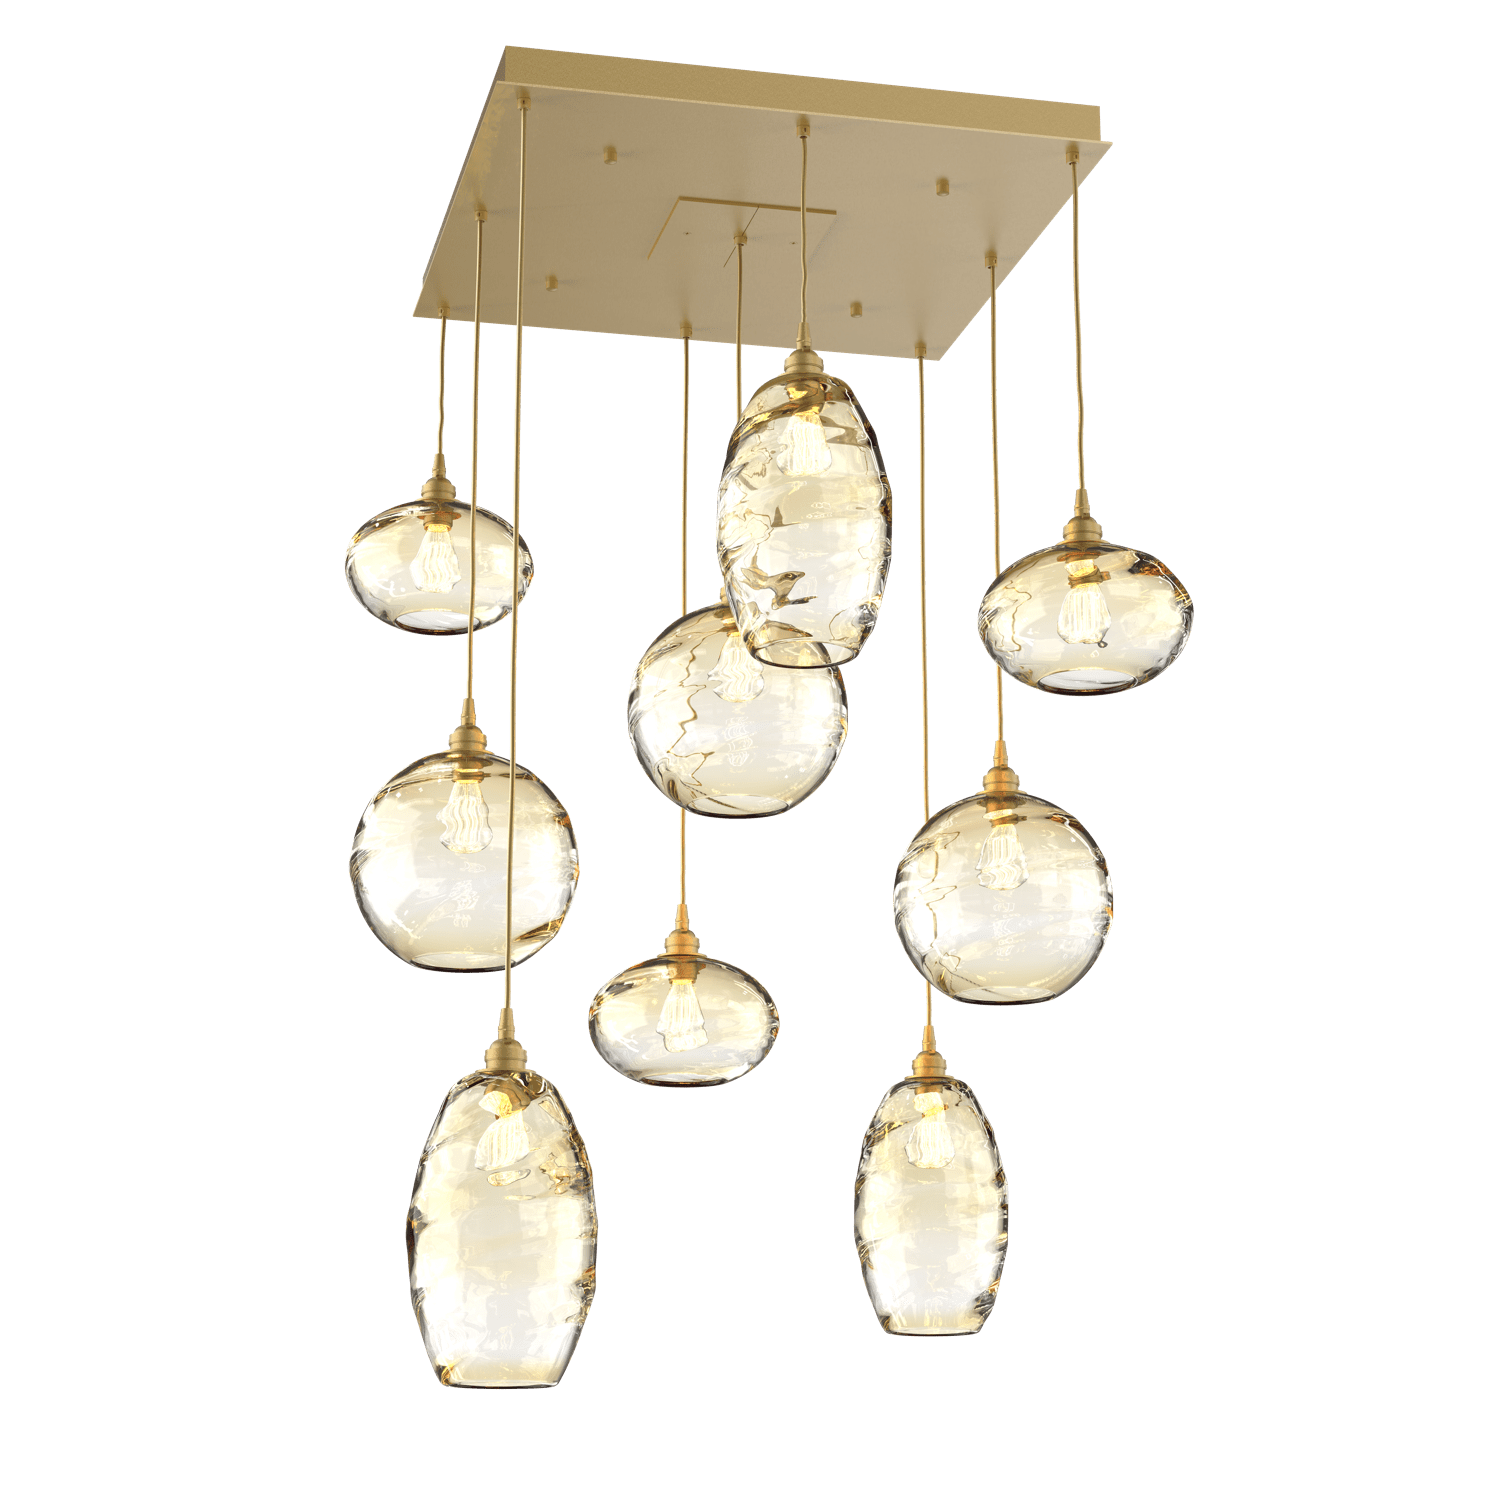 CHB0048-09-GB-OA-Hammerton-Studio-Optic-Blown-Glass-Misto-9-light-square-pendant-chandelier-with-gilded-brass-finish-and-optic-amber-blown-glass-shades-and-incandescent-lamping